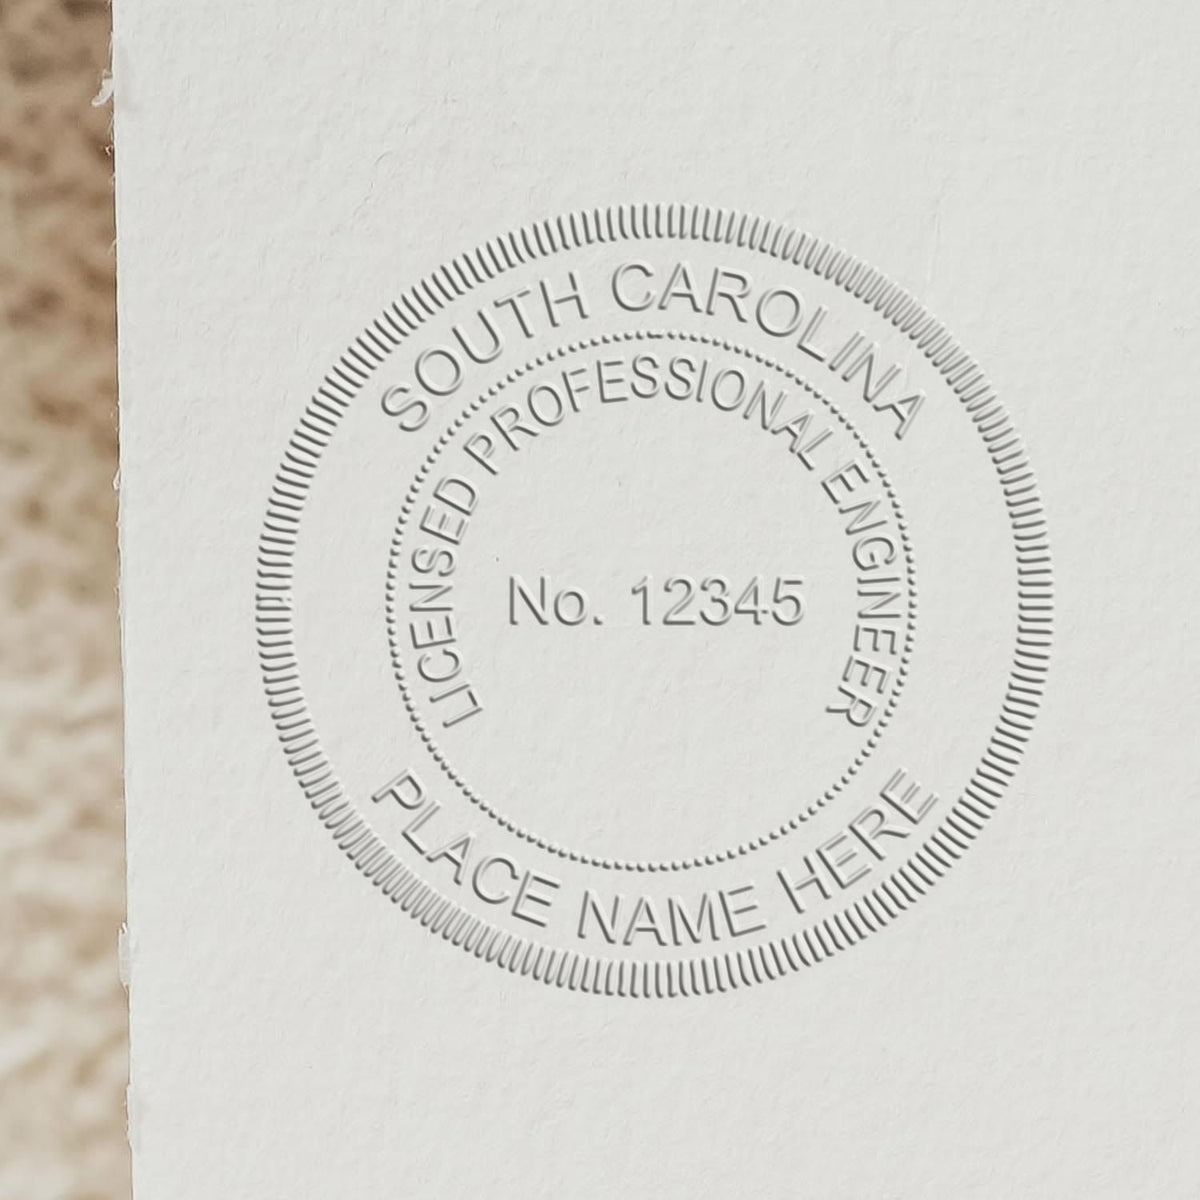 A photograph of the South Carolina Engineer Desk Seal stamp impression reveals a vivid, professional image of the on paper.